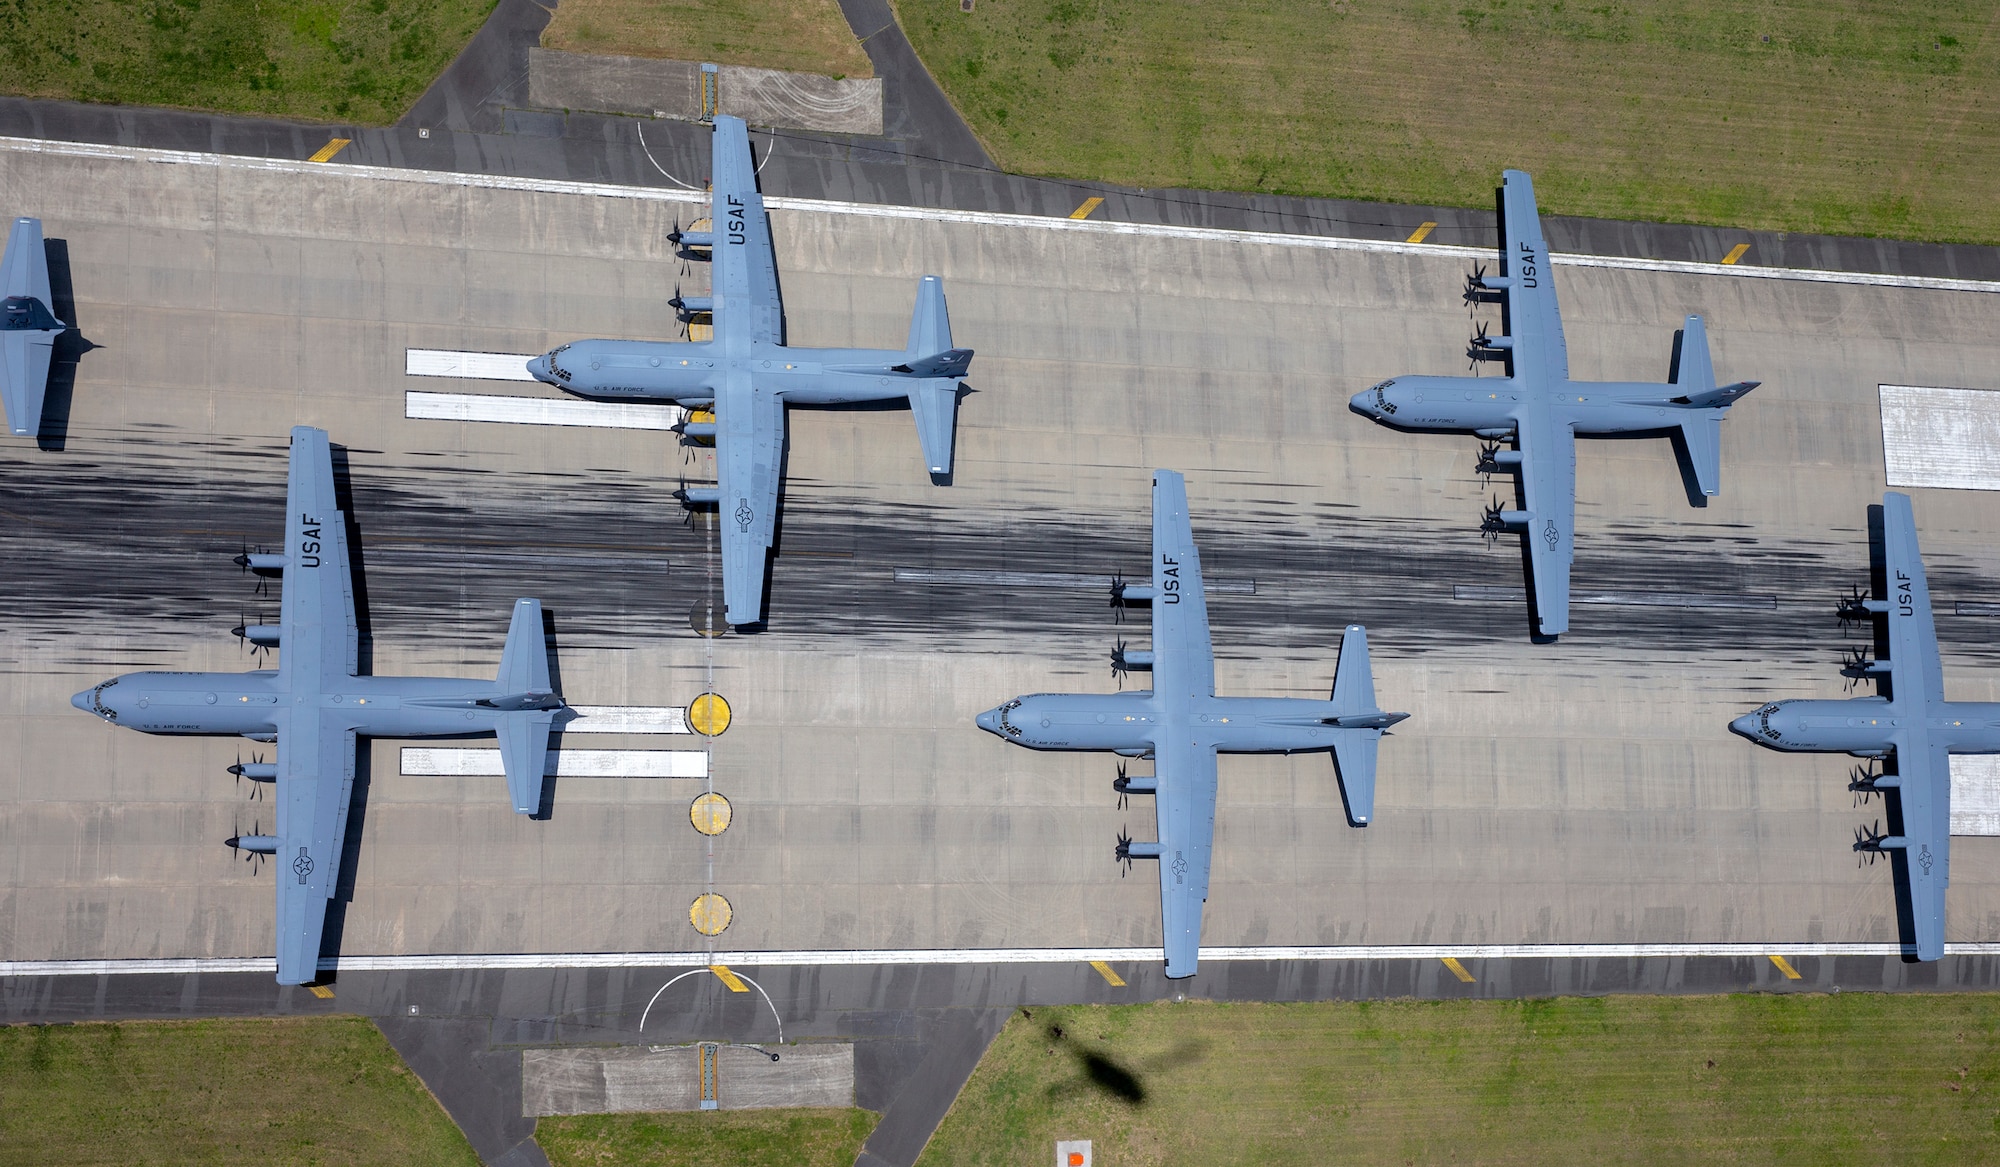 C-130J Super Hercules from the 36th Airlift Squadron prepare to take off during the 374th Airlift Wing Generation Exercise Elephant Walk at Yokota Air Base, Japan, May 4, 2018. The exercise was conducted in order to demonstrate the wing’s ability to rapidly deploy forces across Indo-Pacific region. The 374th AW maintains and operates the C-130J Super Hercules, C-12 Huron, and UH-1N Iroquois, making it the primary Western Pacific airlift hub for U.S. Air Force peacetime and contingency operations. (U.S. Air Force photo by Yasuo Osakabe)